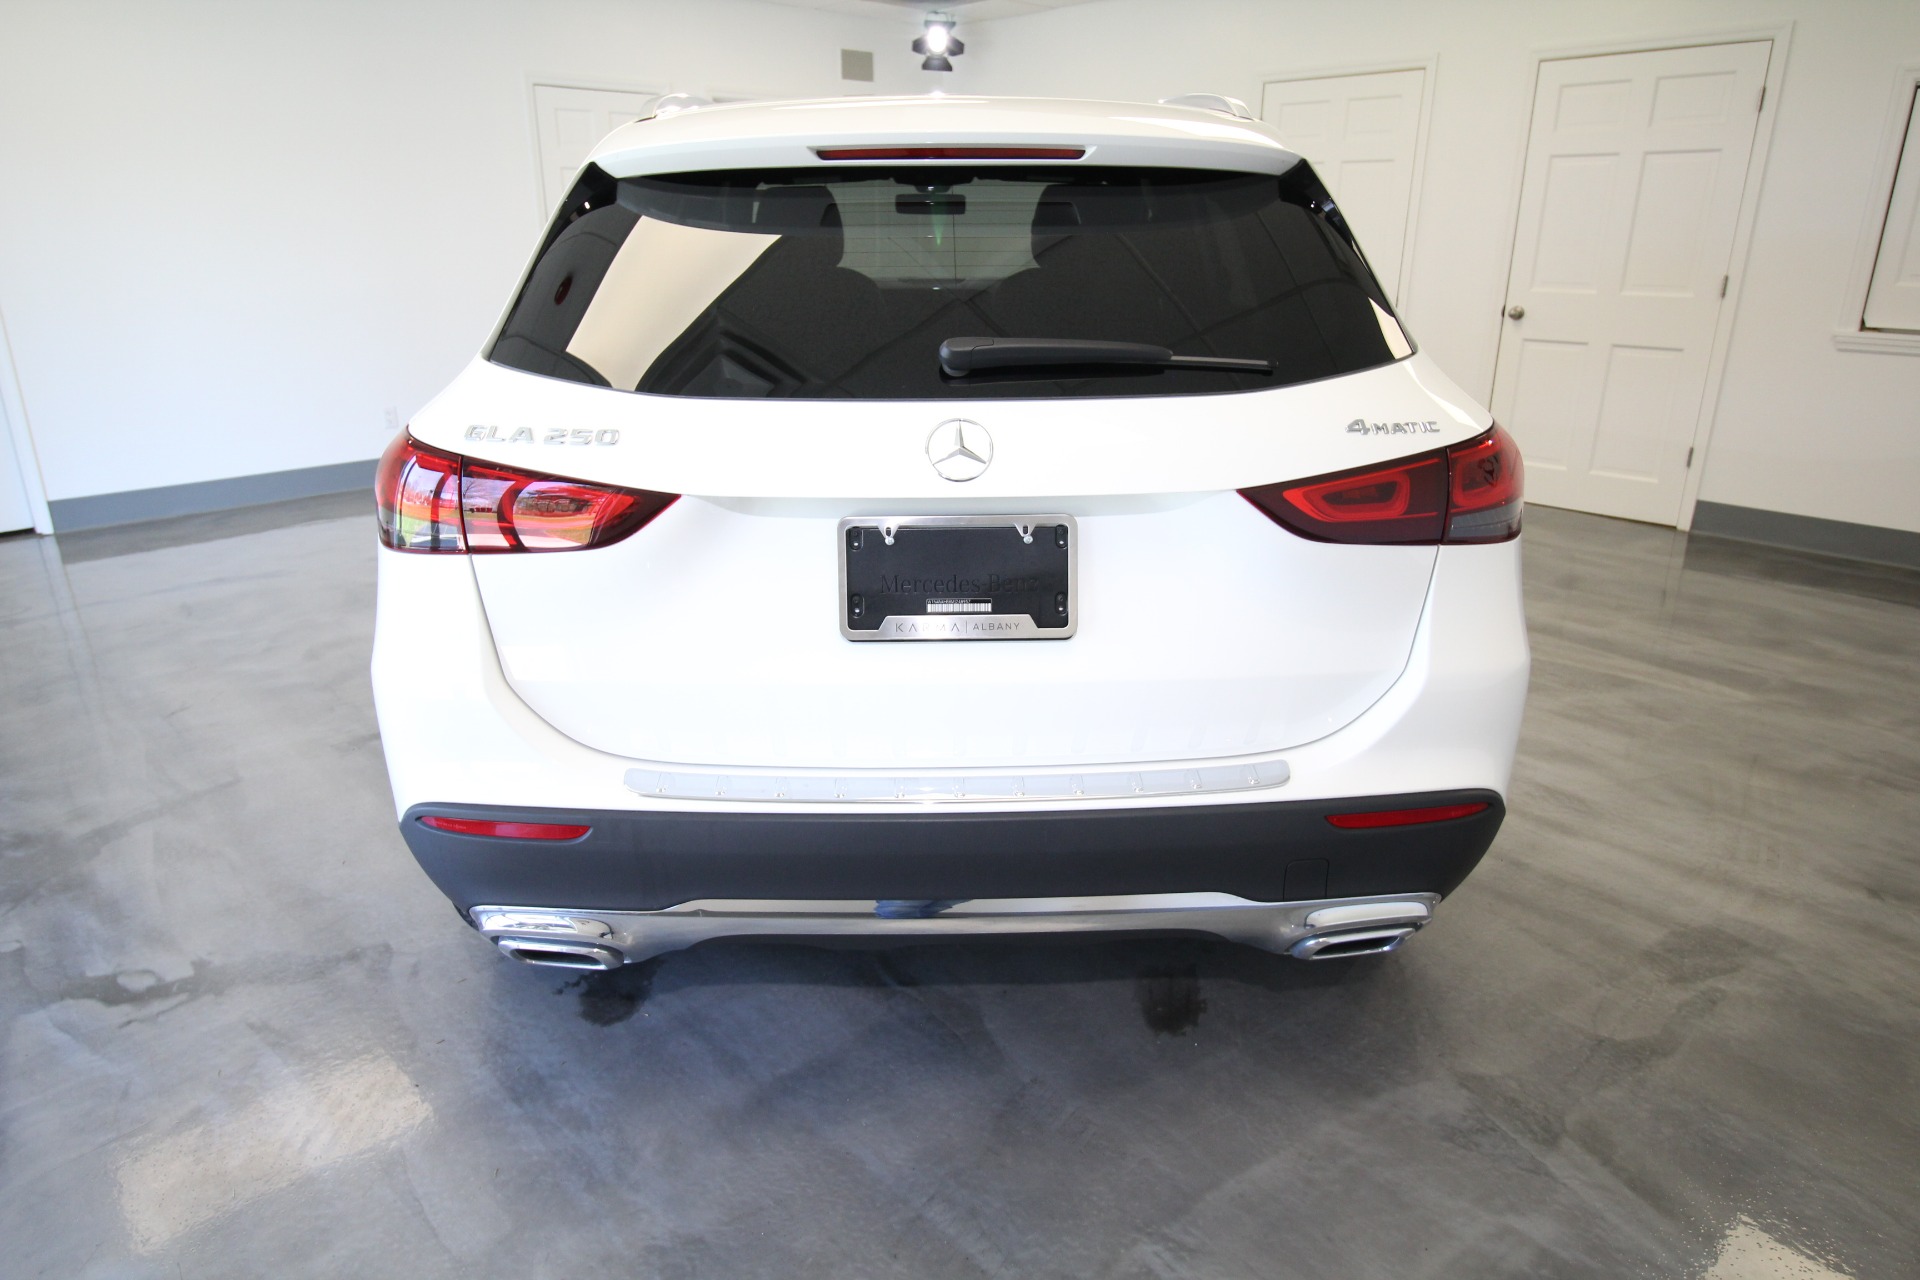 Used 2021 White Mercedes-Benz GLA-Class GLA250 4MATIC LIKE NEW AWD LOW MILES | Albany, NY